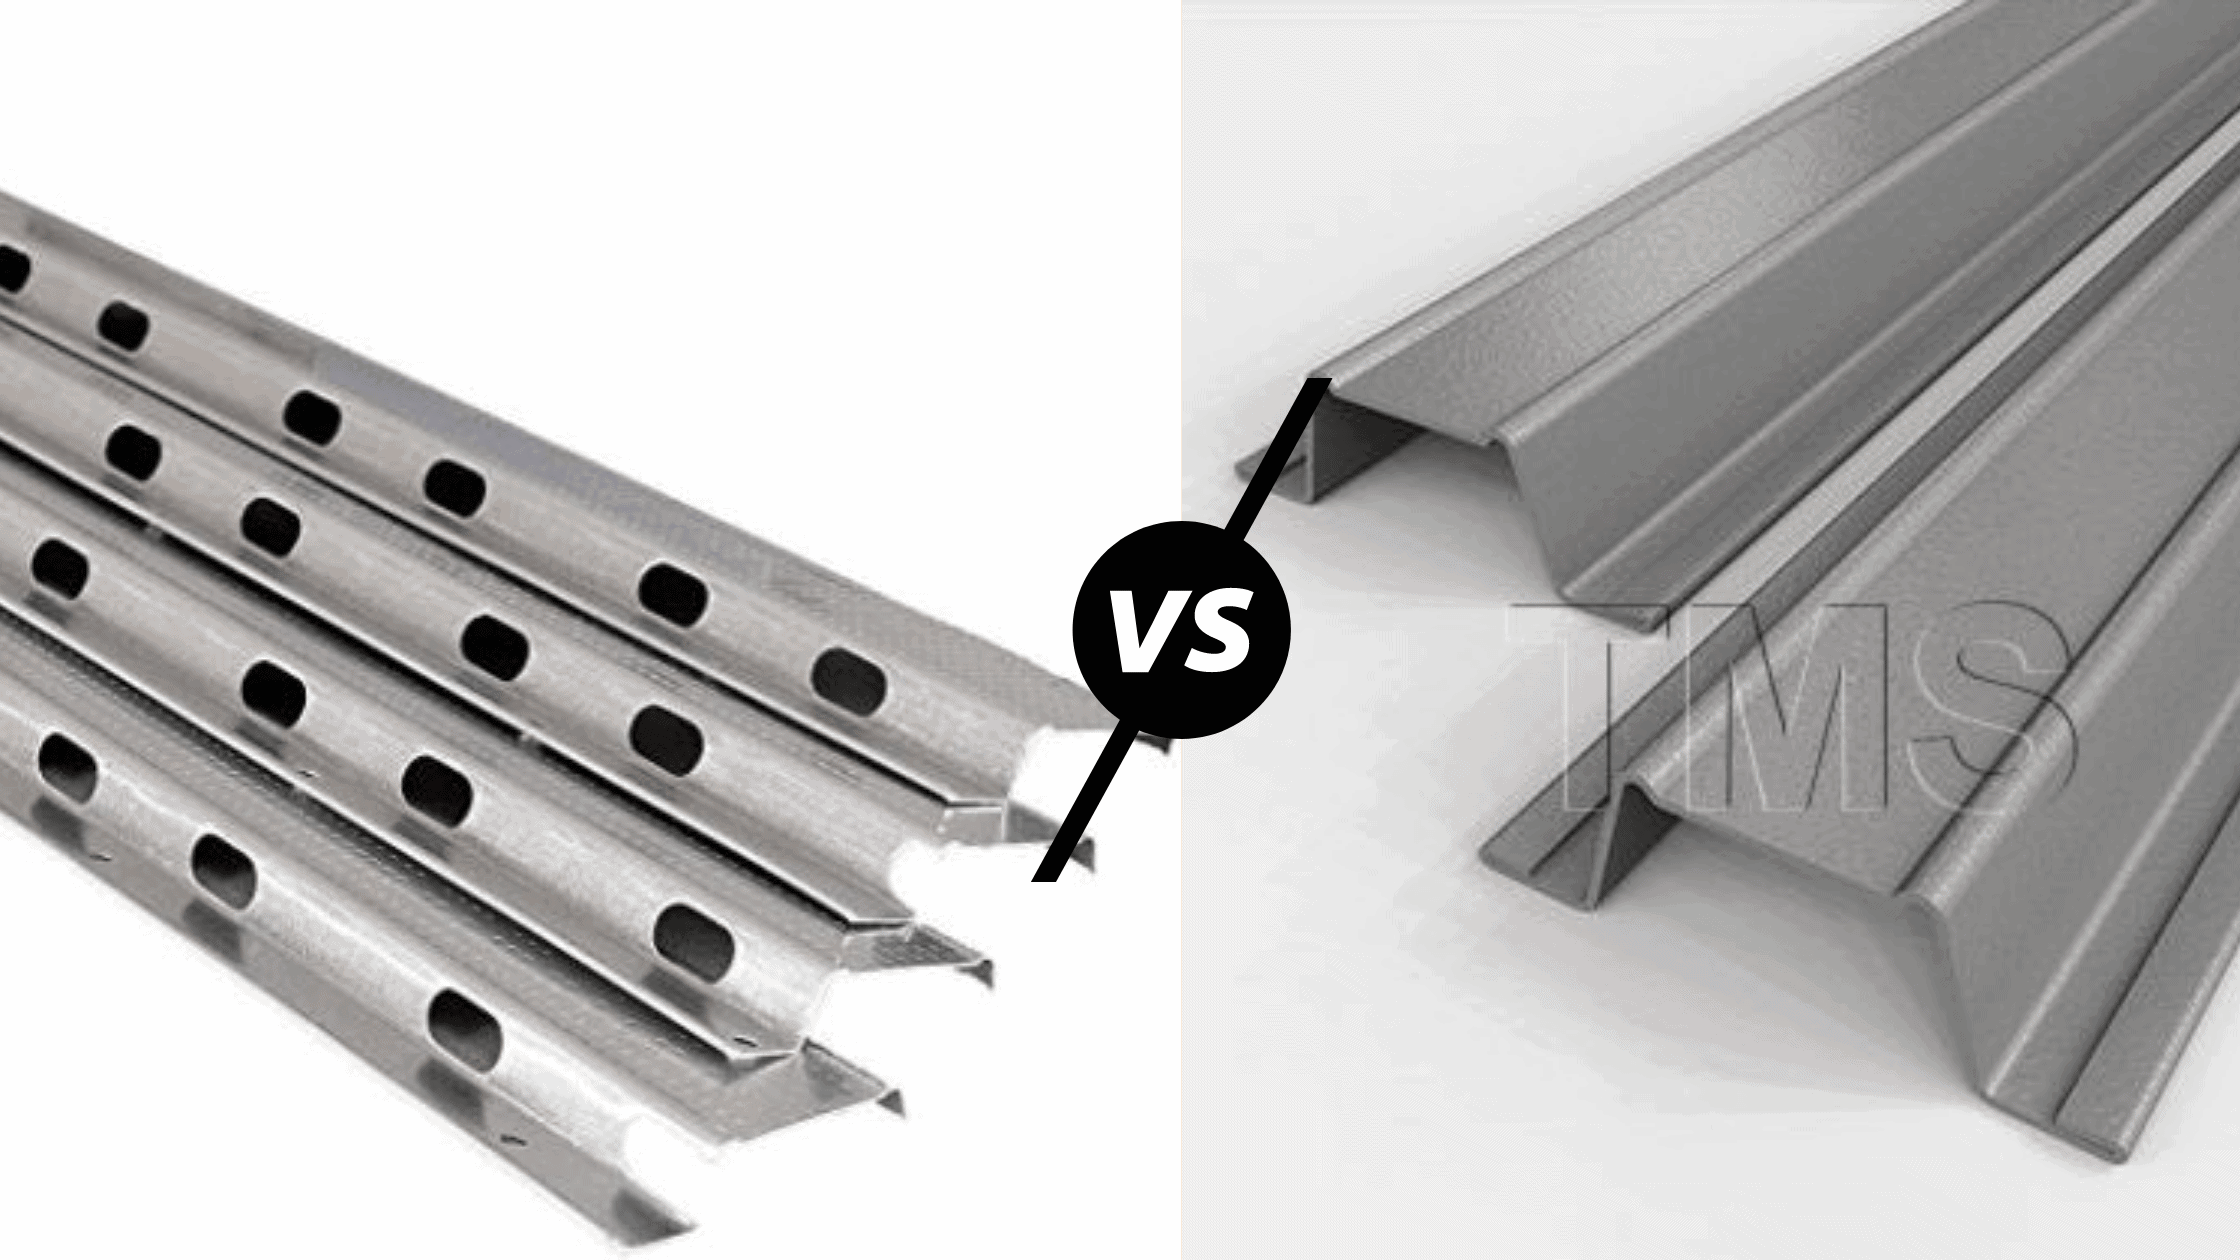 Resilient Channel Vs Hat Channel: Which Is Better For Soundproofing